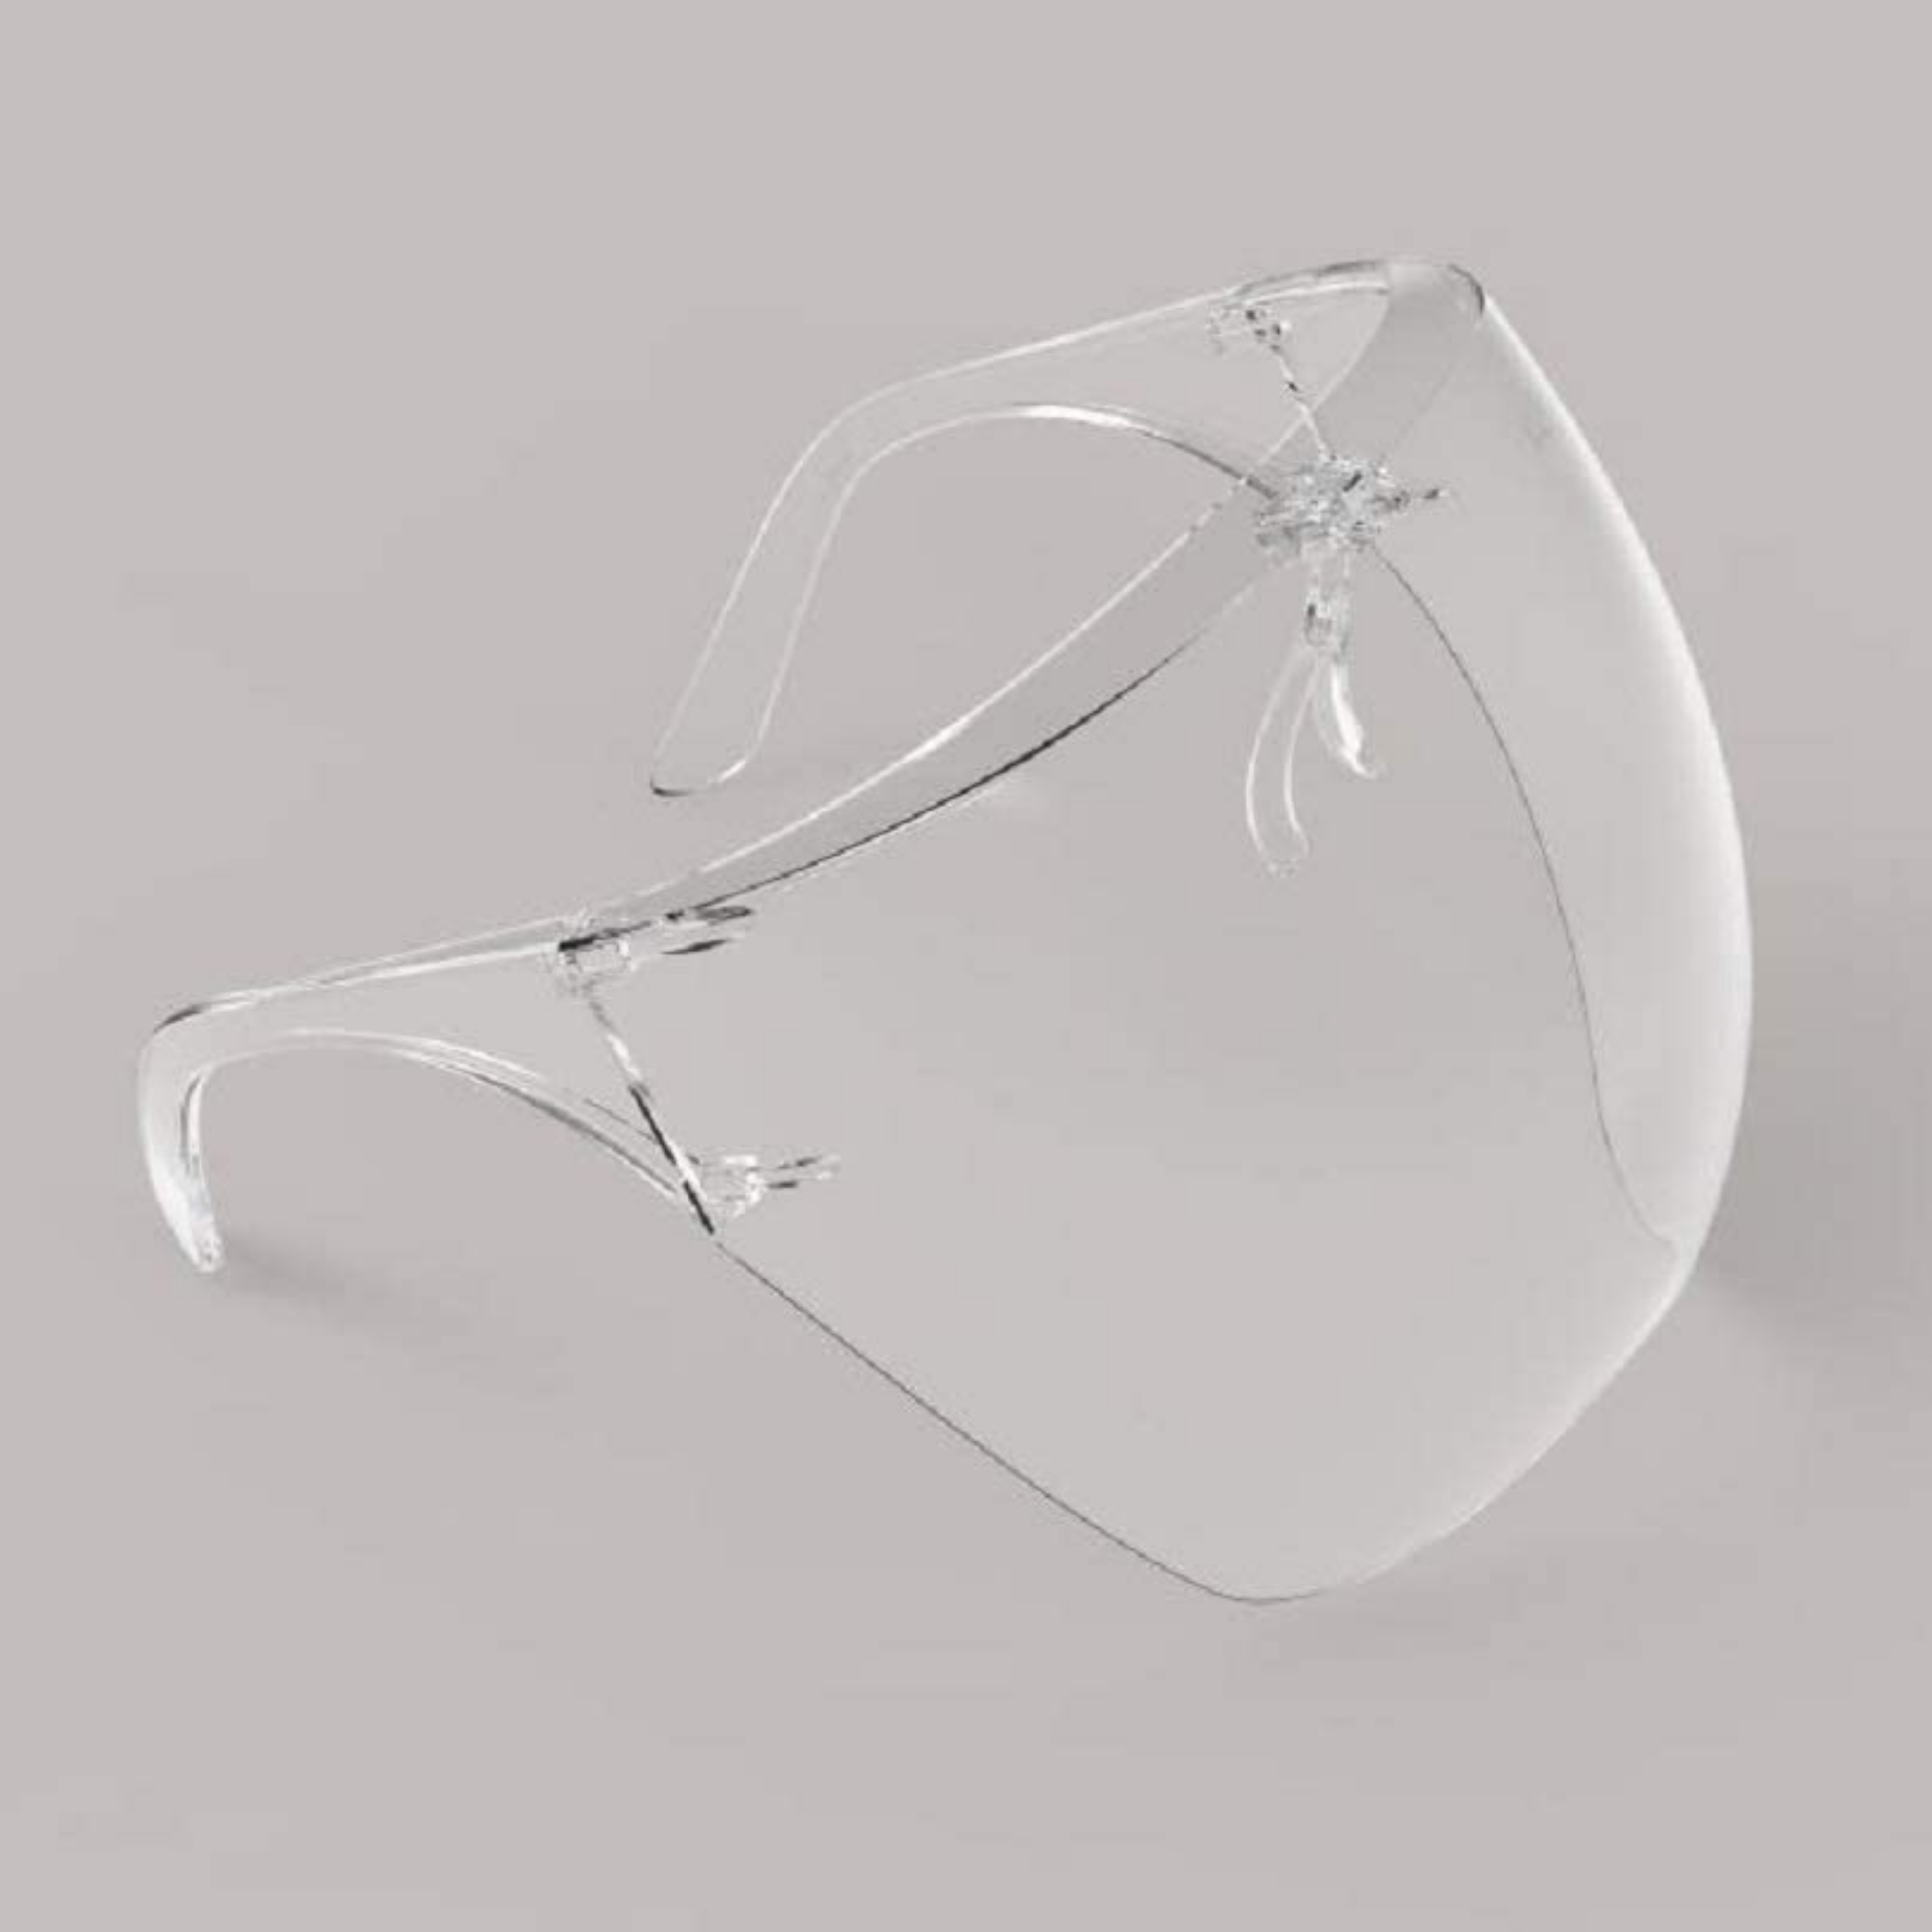 Face Shield Glass - Reusable Clear Face Shield